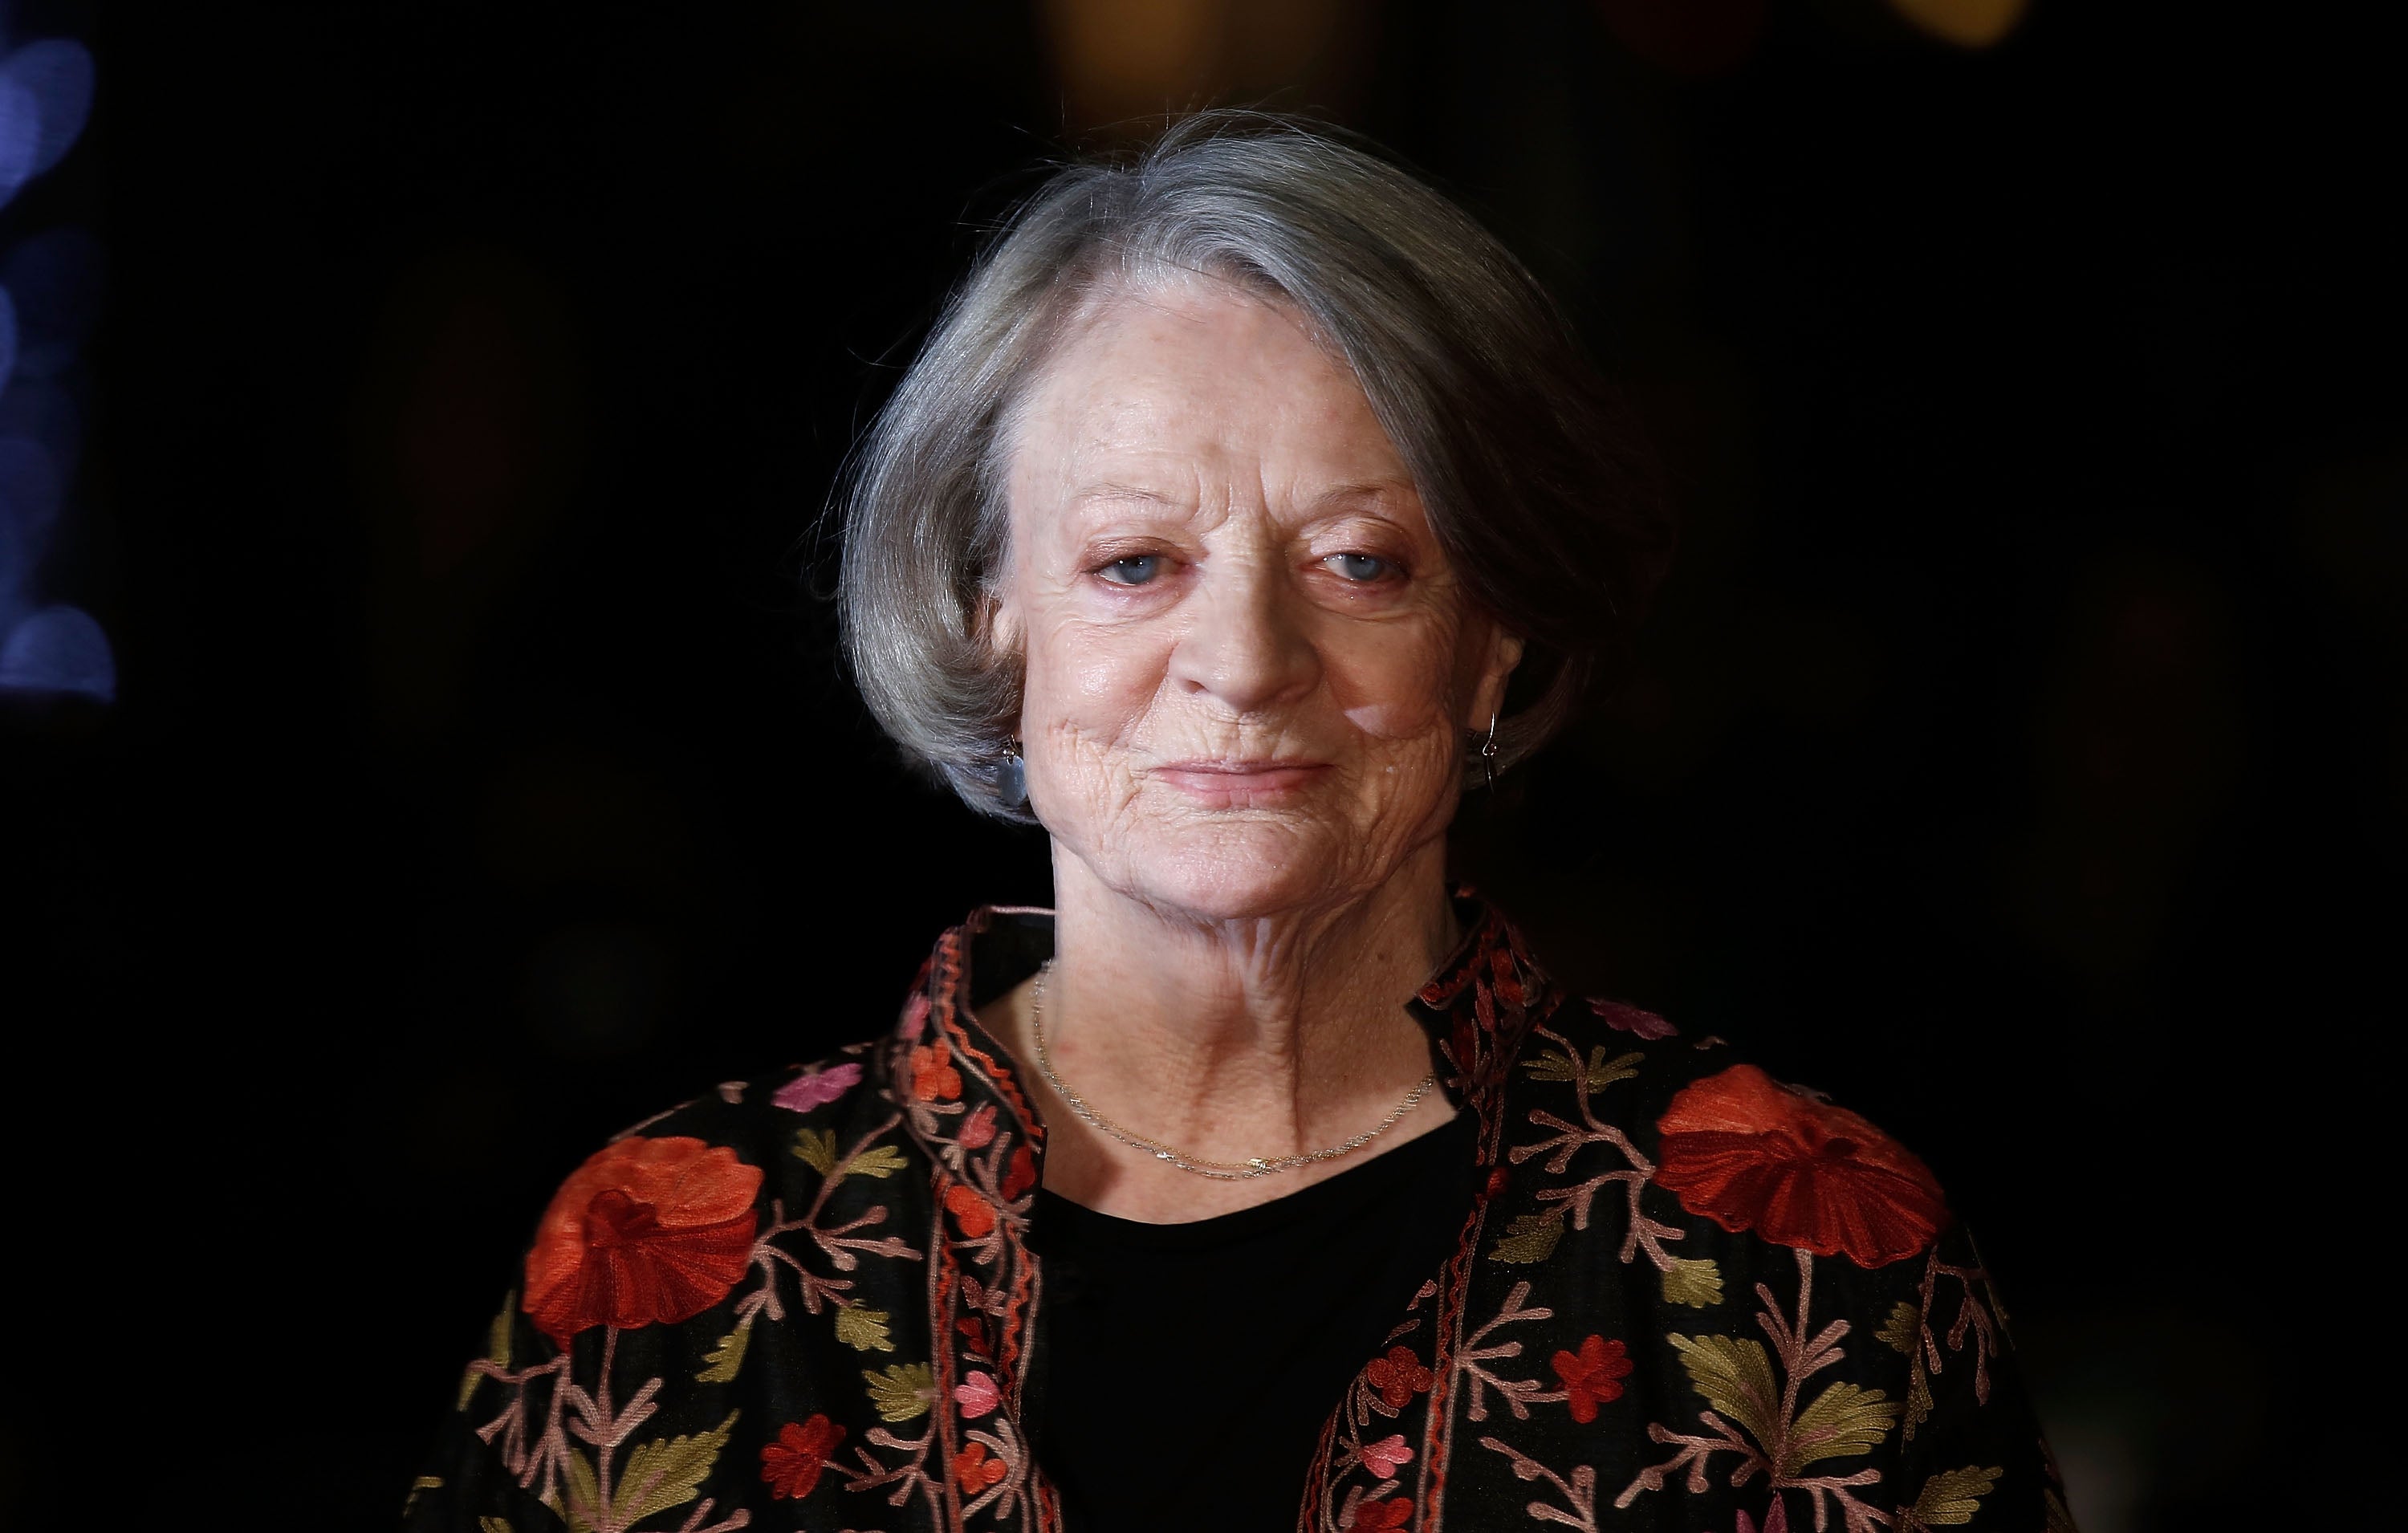 Maggie Smith arrives for "The Lady In The Van" at Odeon Leicester Square in London on 13 October 2015